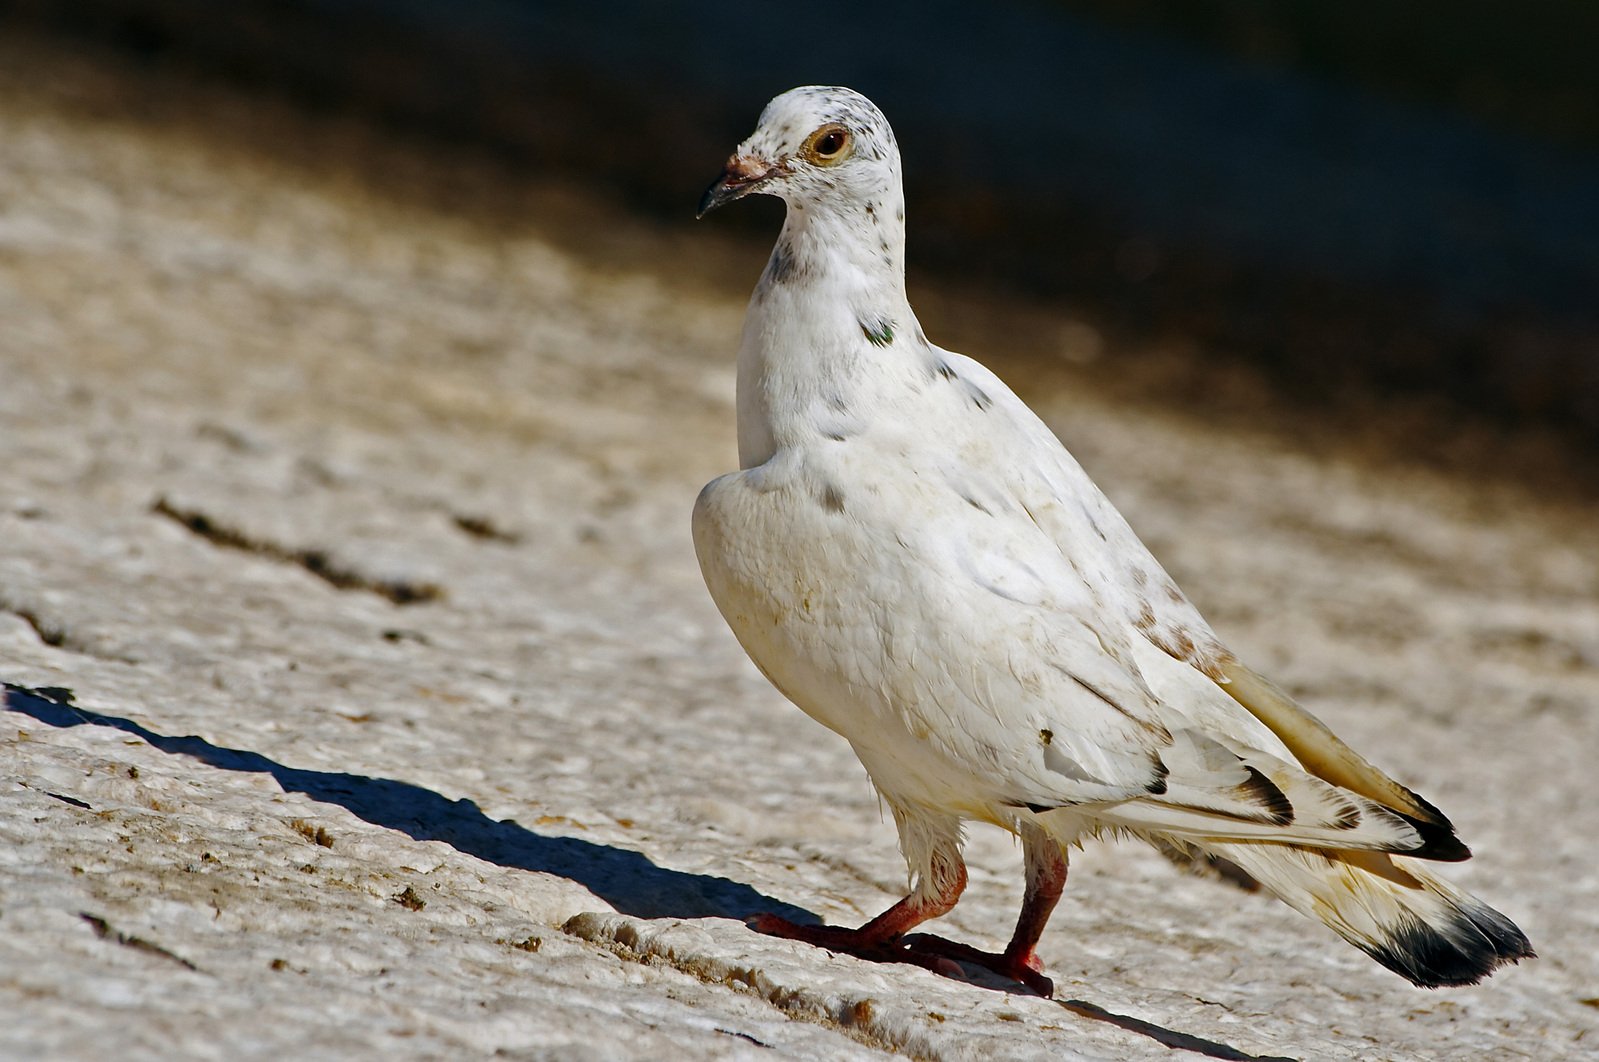 a close up of a white pigeon with brown legs